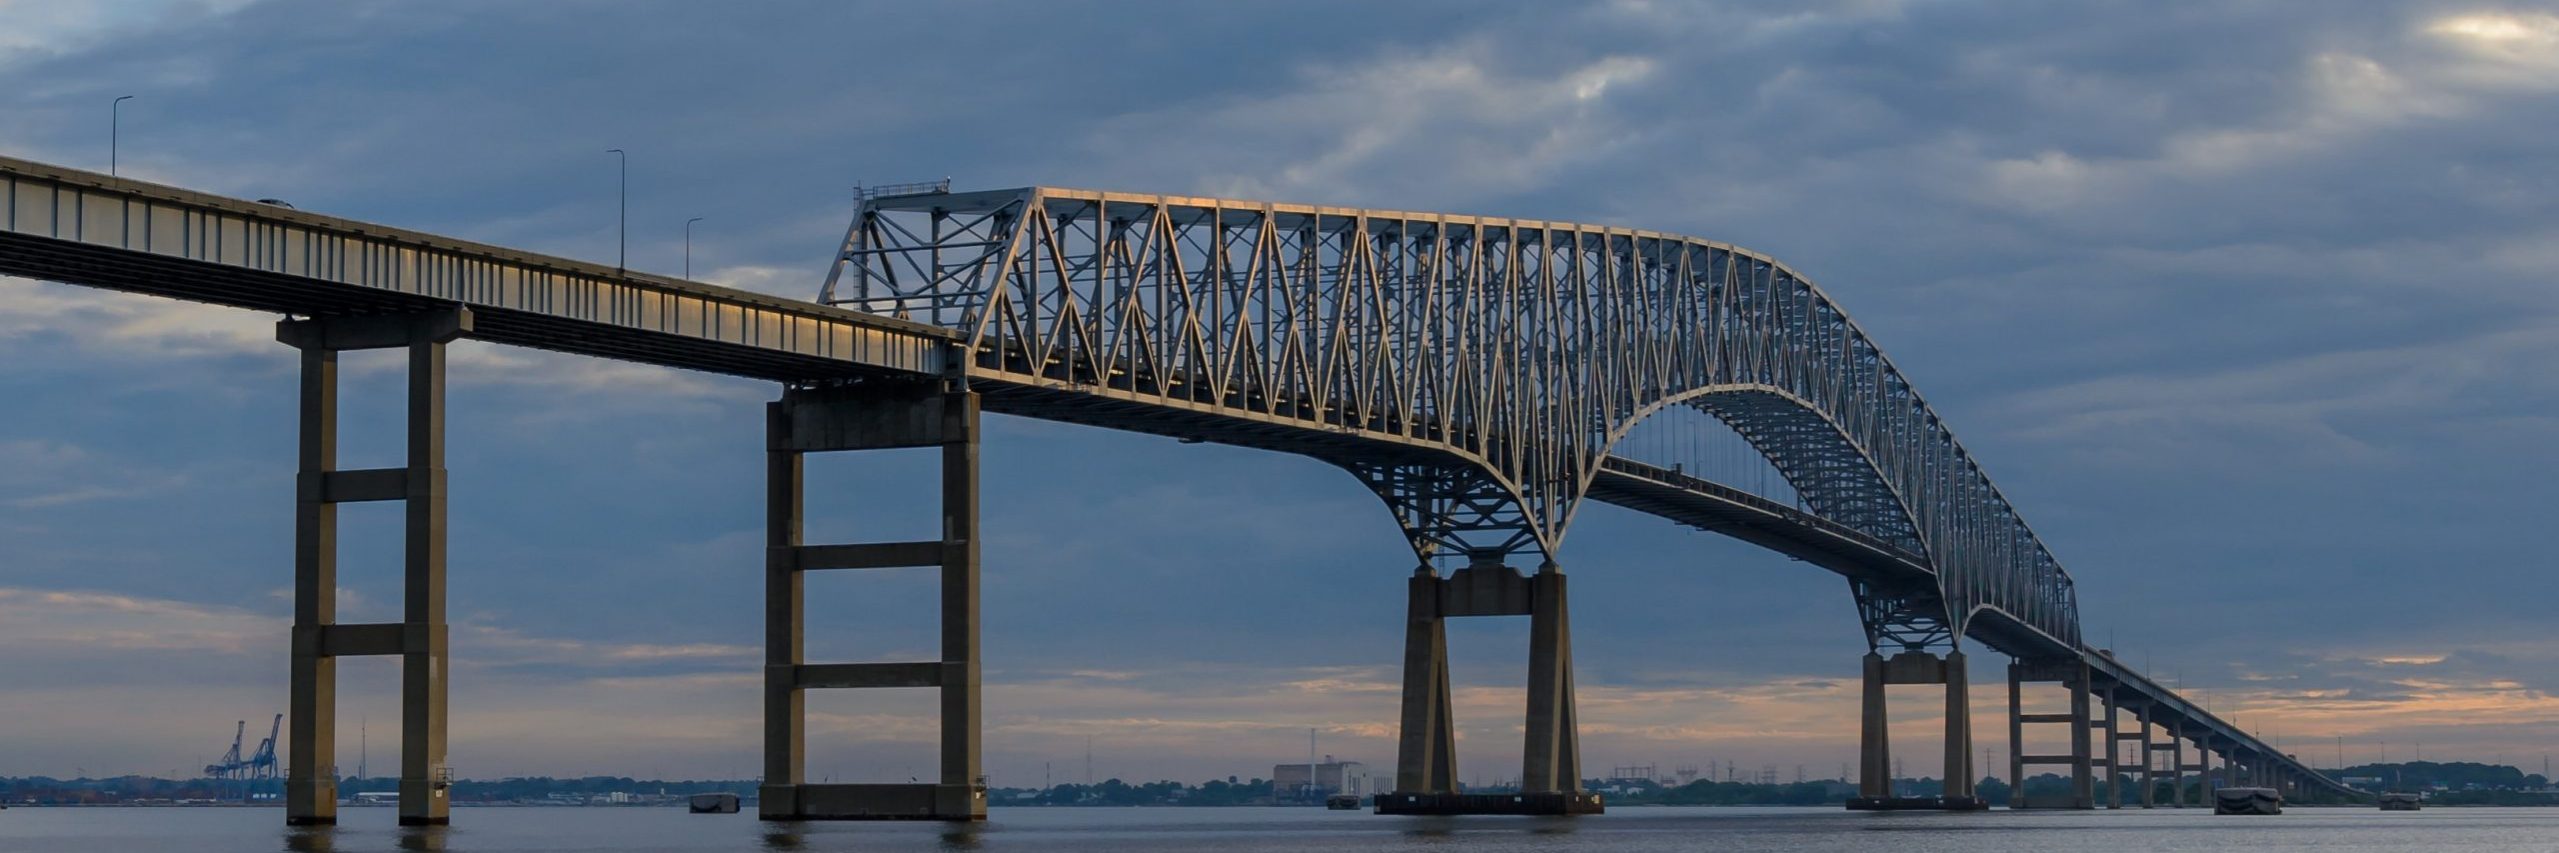 Image of the Francis Scott Key Bridge in Baltimore during the evening